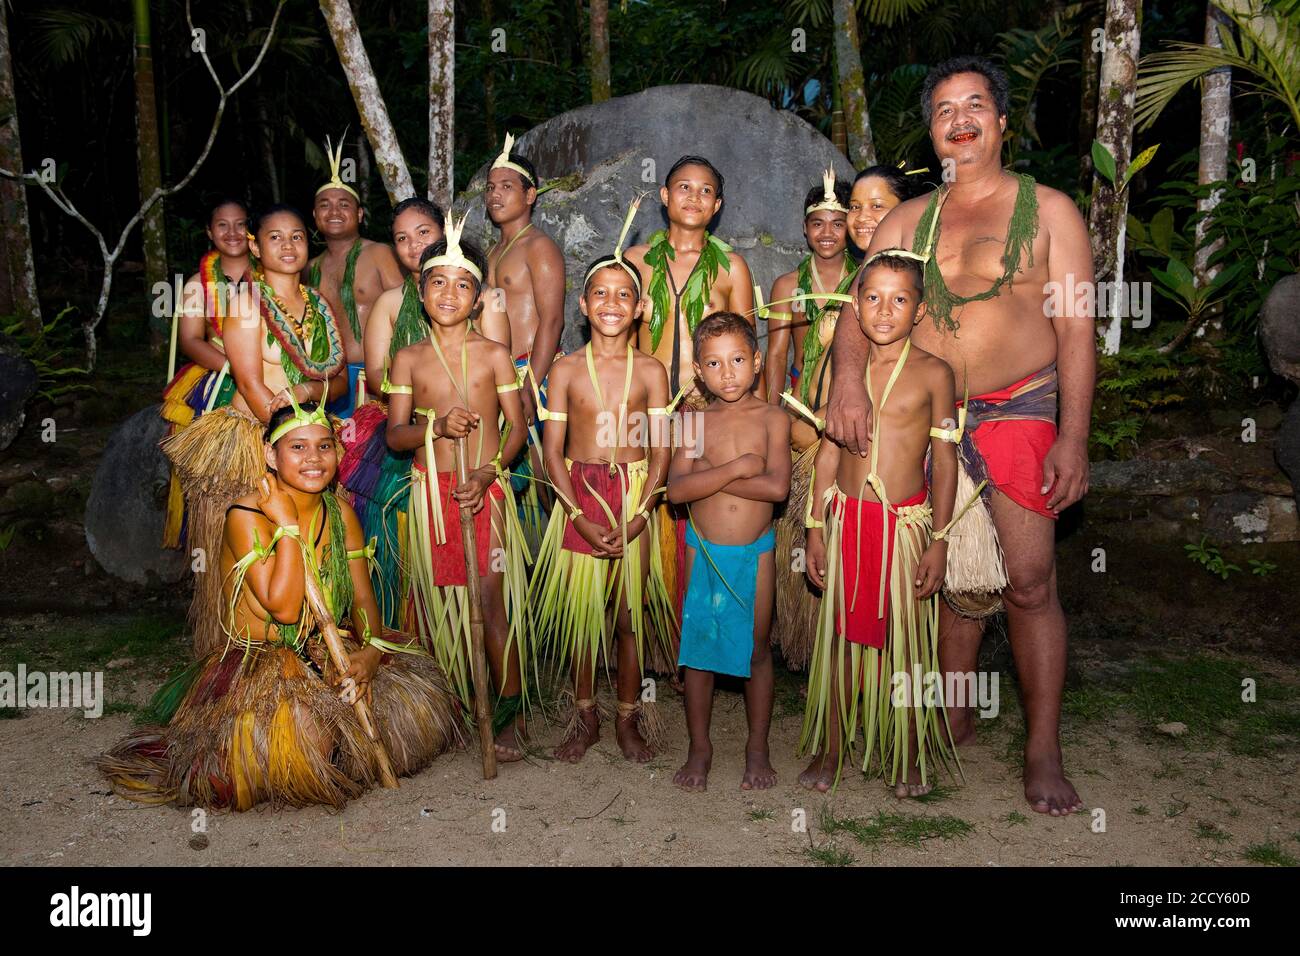 https://c8.alamy.com/comp/2CCY60D/group-of-natives-on-yap-in-traditional-dress-yap-island-micronesia-2CCY60D.jpg